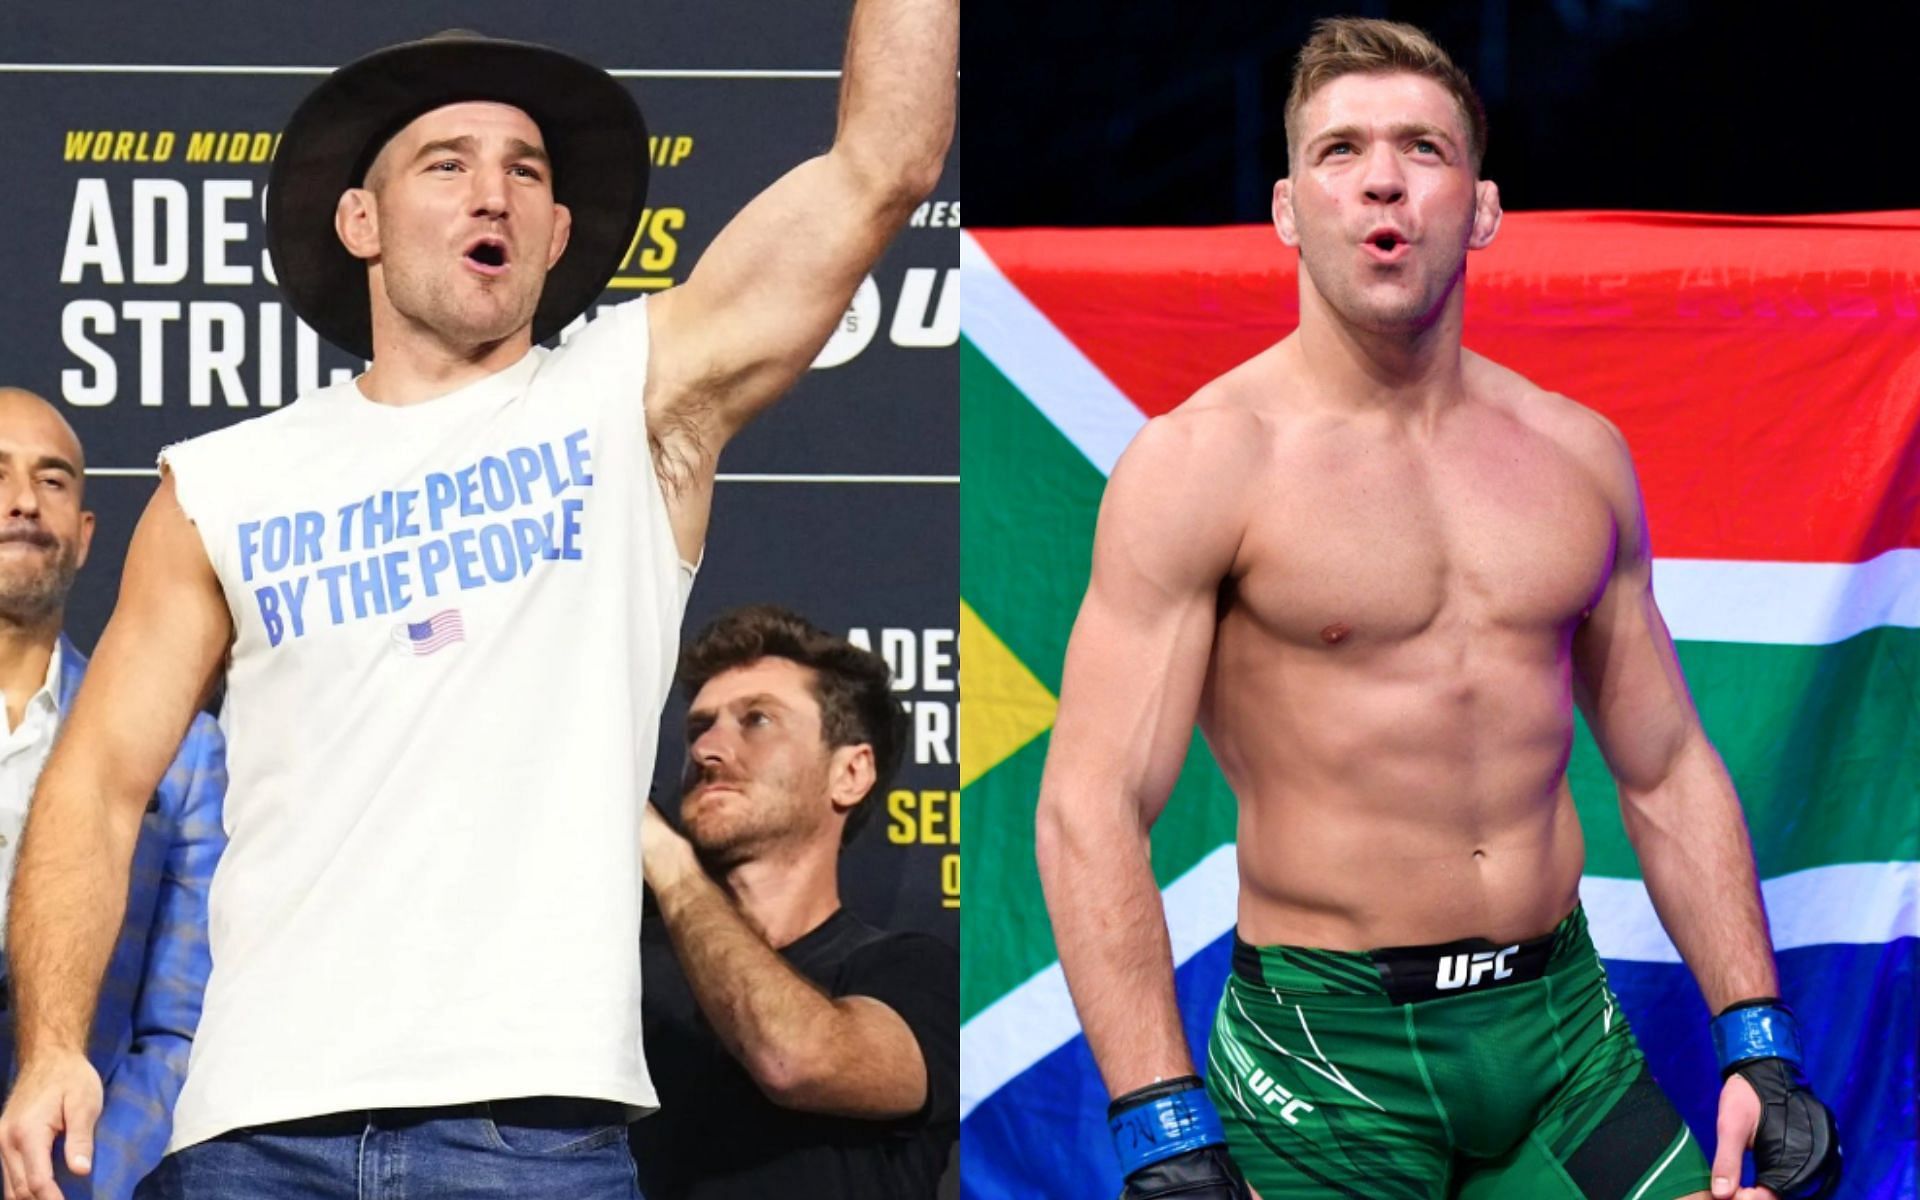 Sean Strickland (left) will go toe to toe with Dricus du Plessis (right) at UFC 297 [Images courtesy: @SStricklandMMA and @dricusduplessis on X]